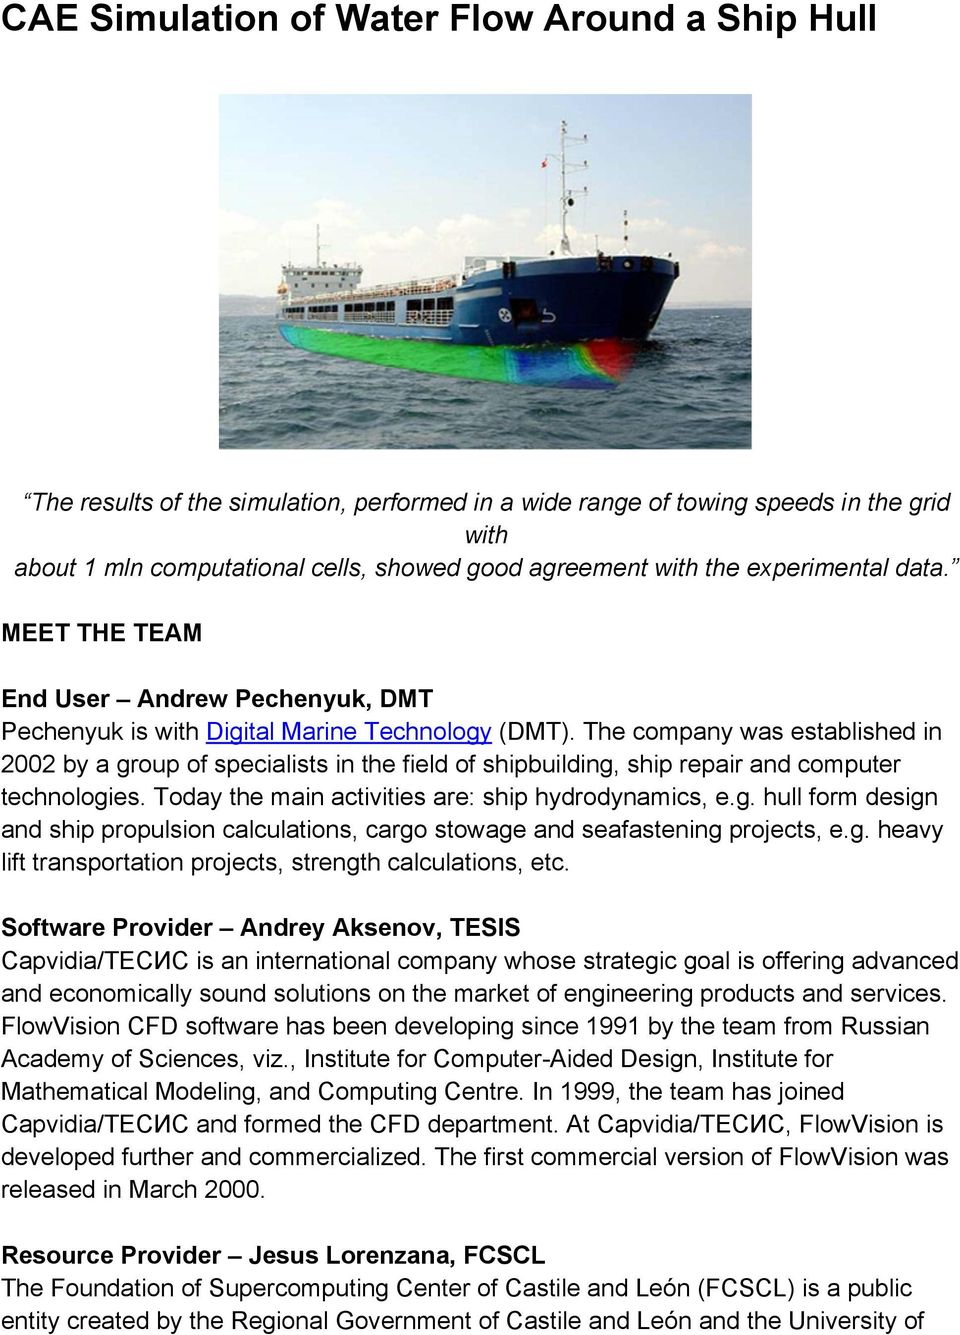 The company was established in 2002 by a group of specialists in the field of shipbuilding, ship repair and computer technologies. Today the main activities are: ship hydrodynamics, e.g. hull form design and ship propulsion calculations, cargo stowage and seafastening projects, e.